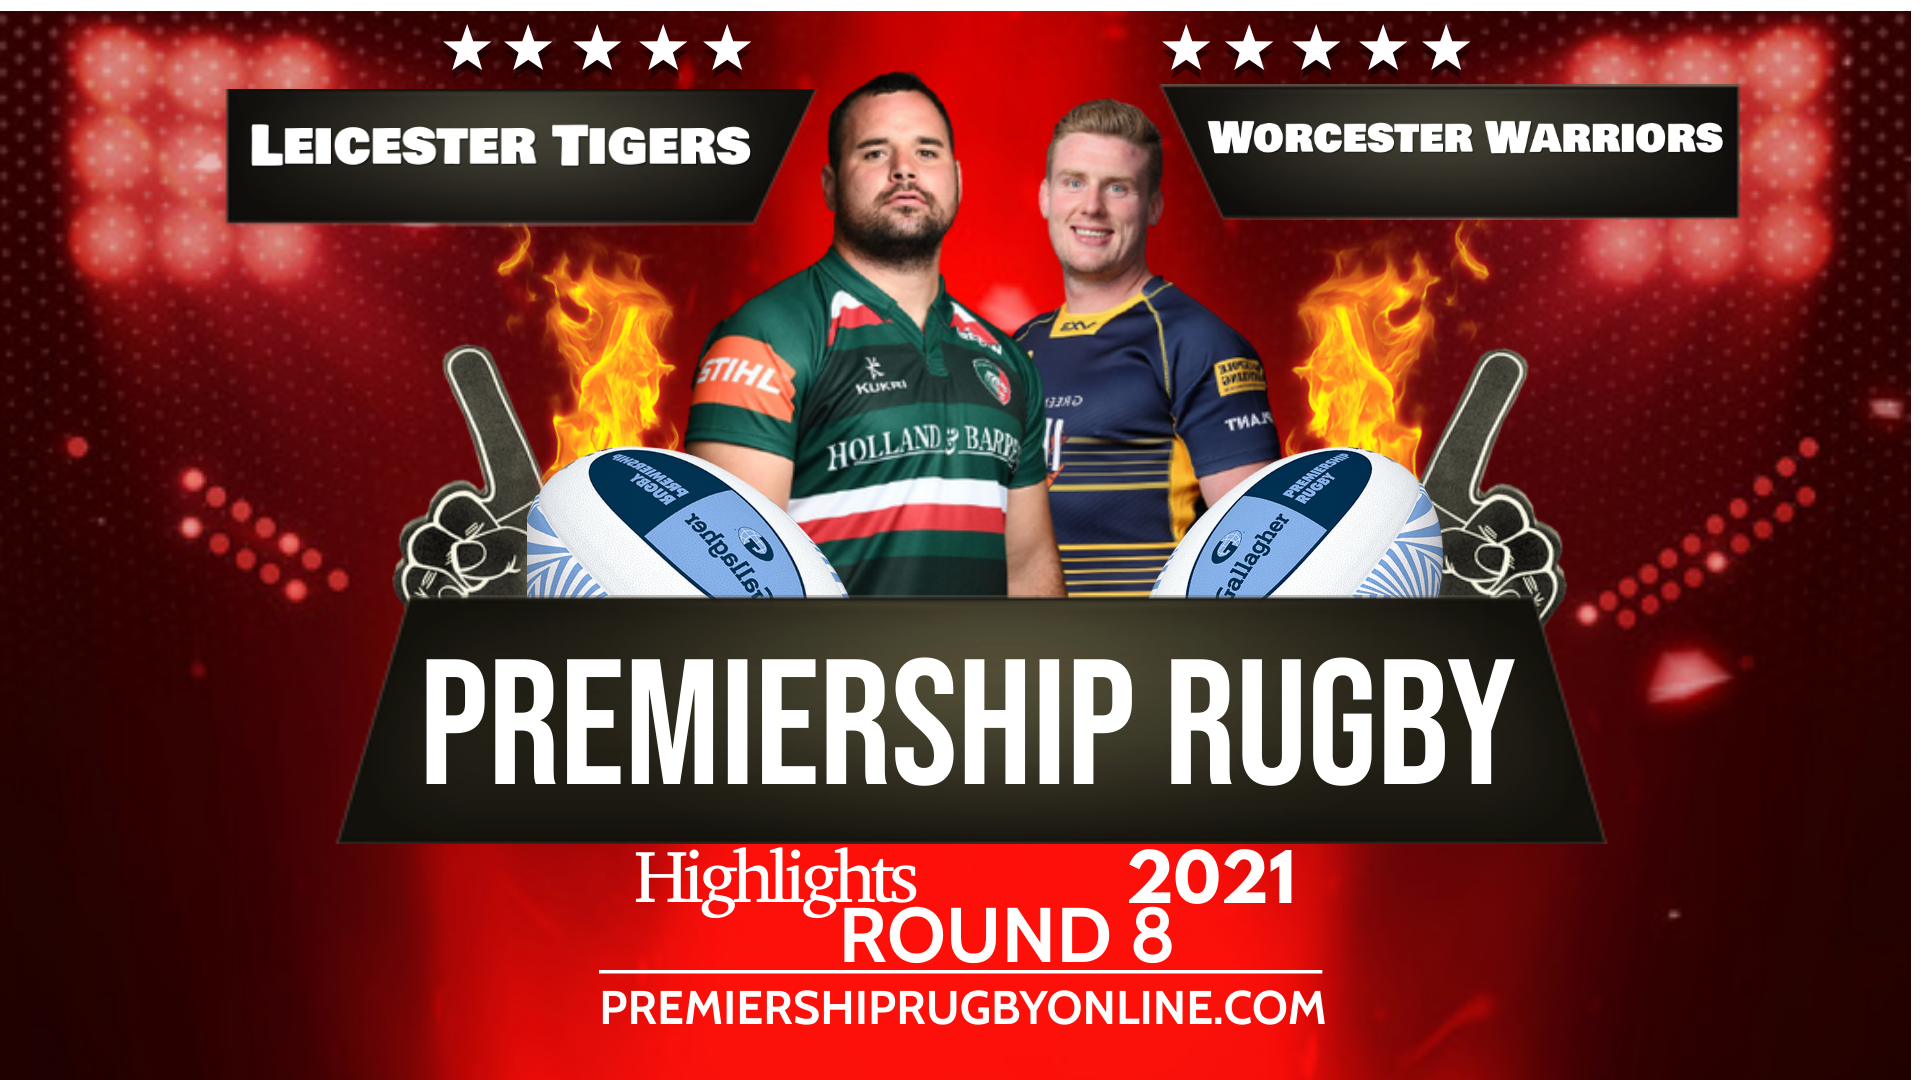 Leicester Tigers Vs Worcester Warriors Highlights 2021 RD 8